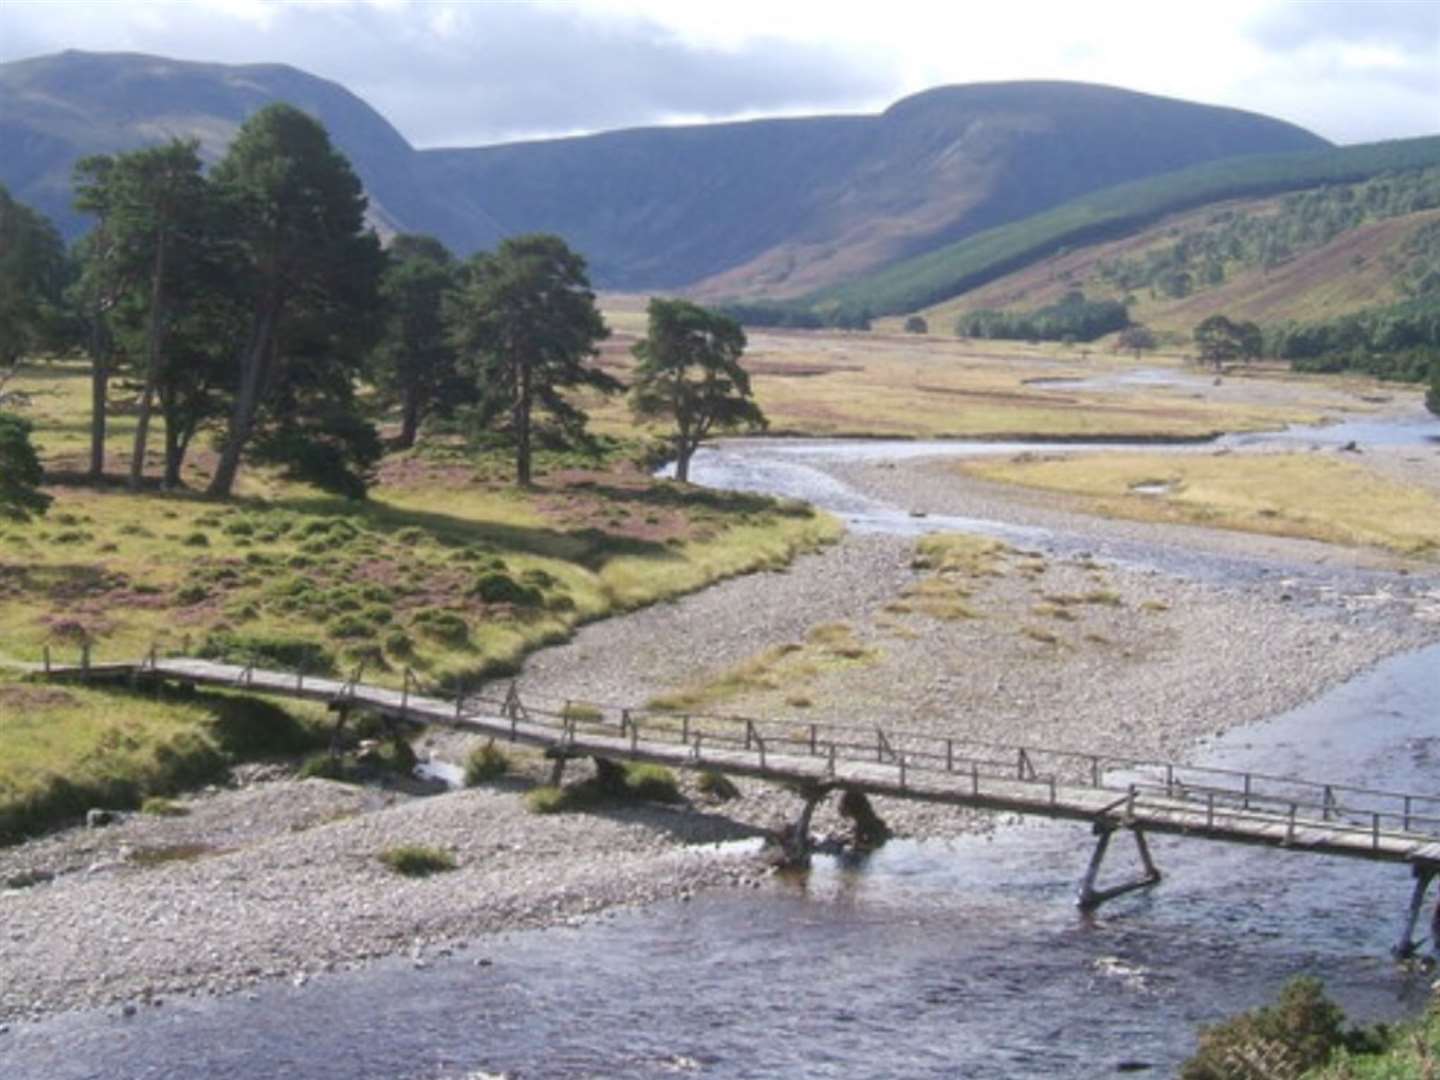 The iconic crossing on Glenfeshie is still much missed and needs replacing.